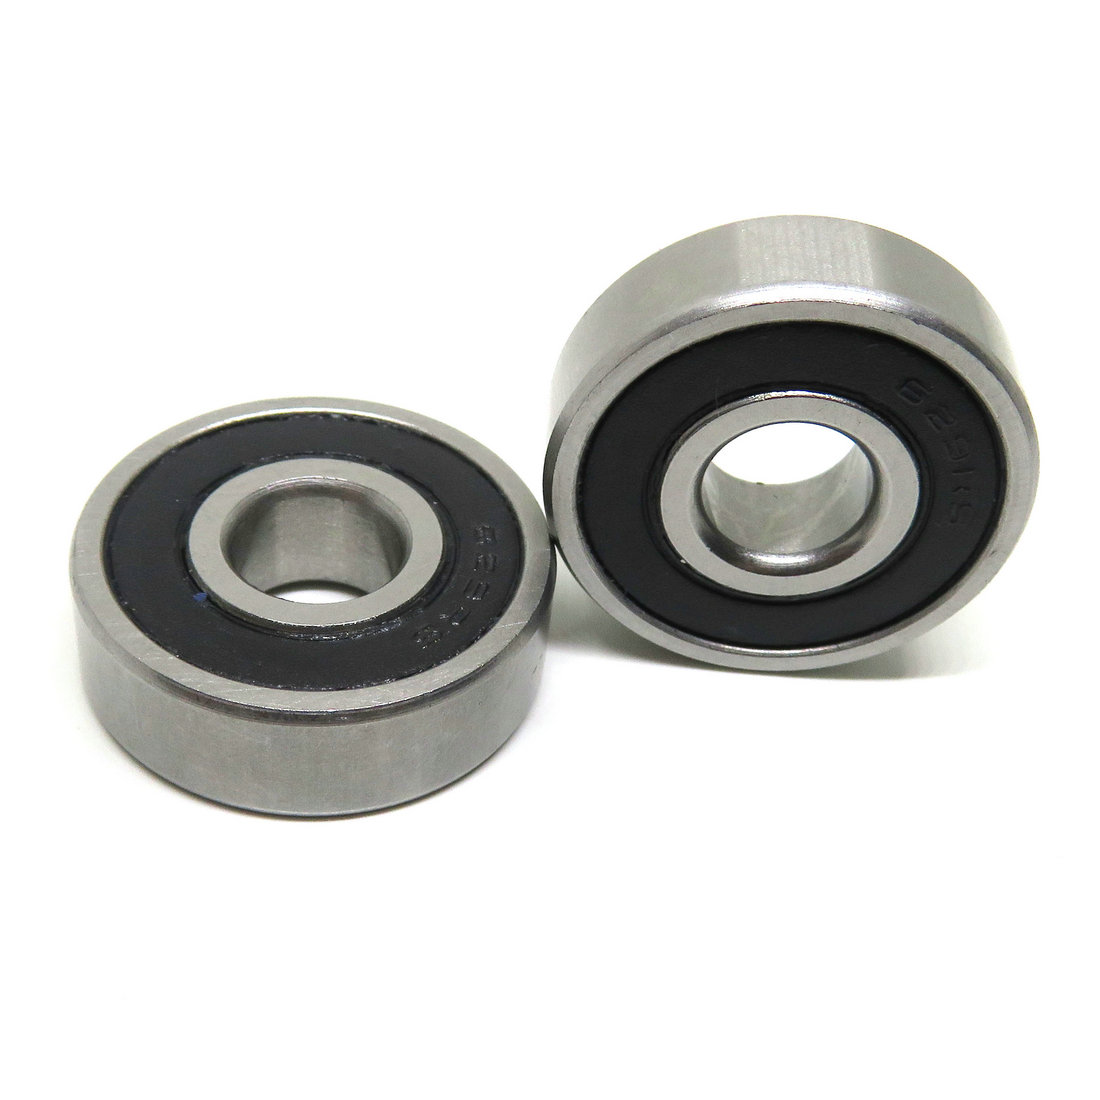 Stable Performance 628-2RS Bearing Steel 8x24x8mm Deep Groove Ball Bearings 628RS For Office Equipment.jpg